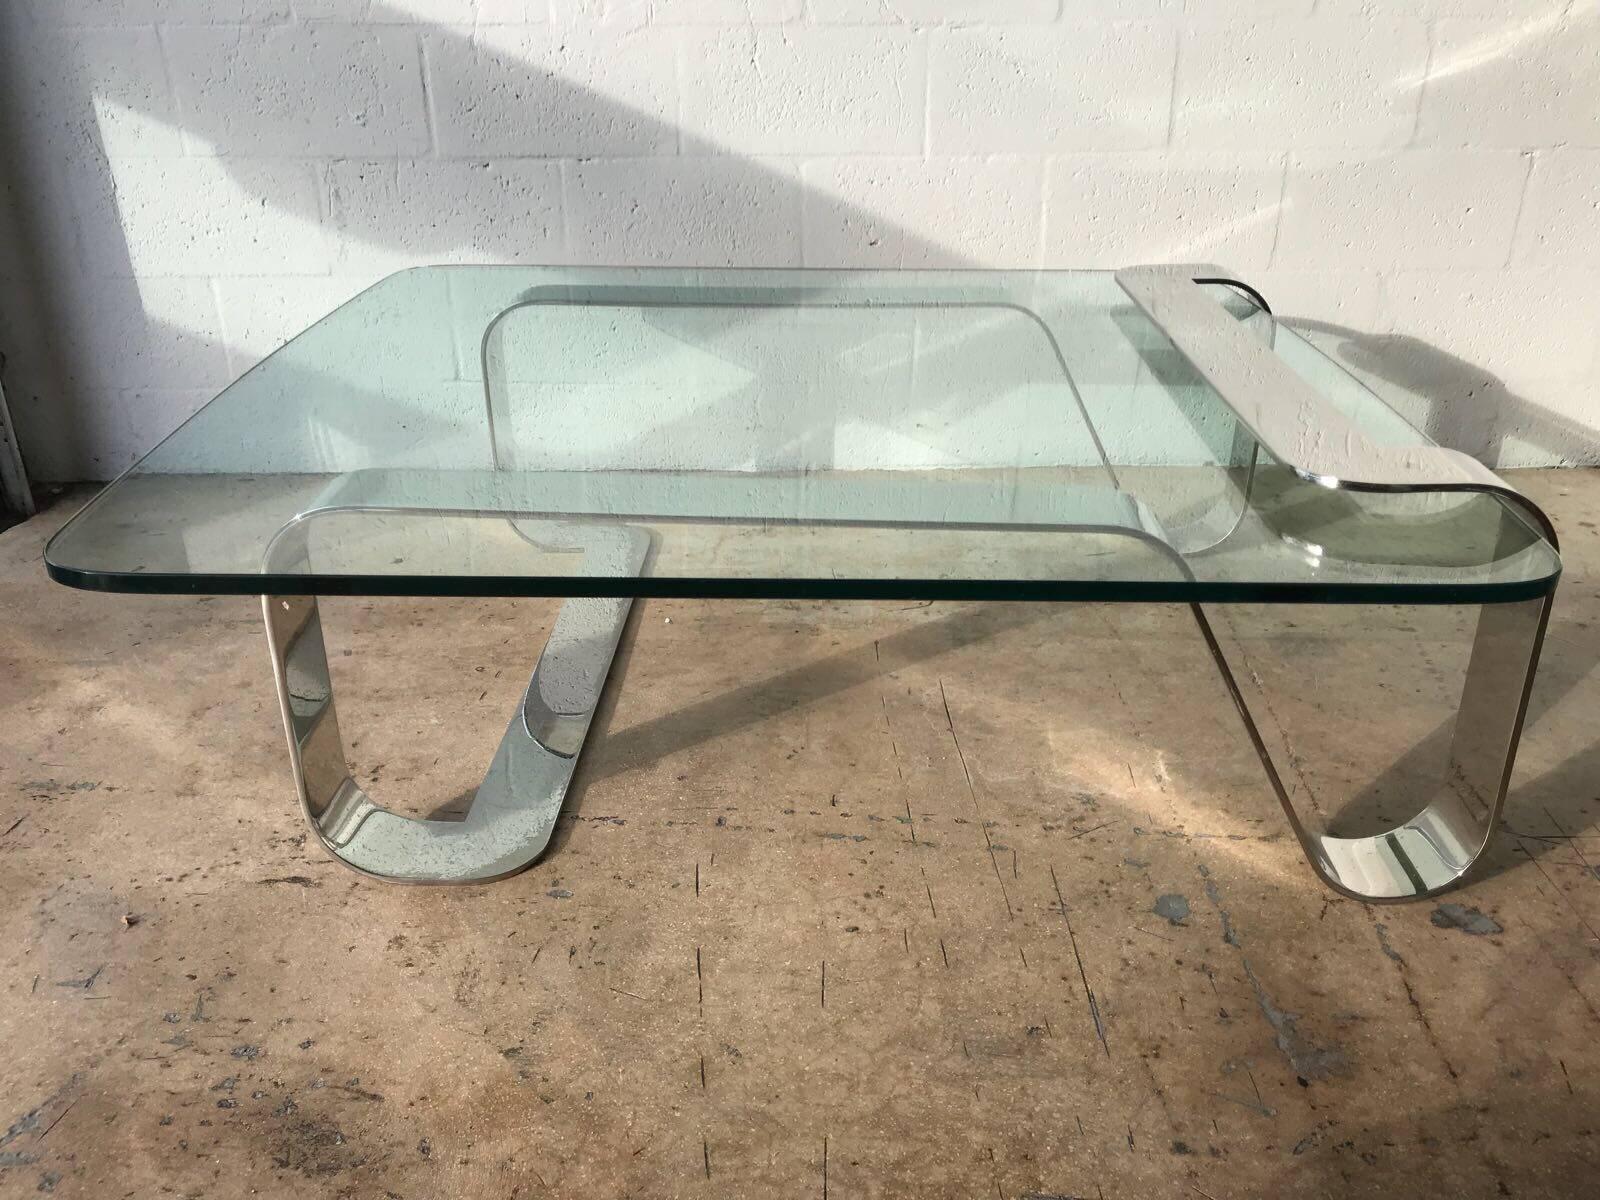 Sculptural steel coffee table designed by Gary Gutterman, table was originally purchased for the French embassy in London.